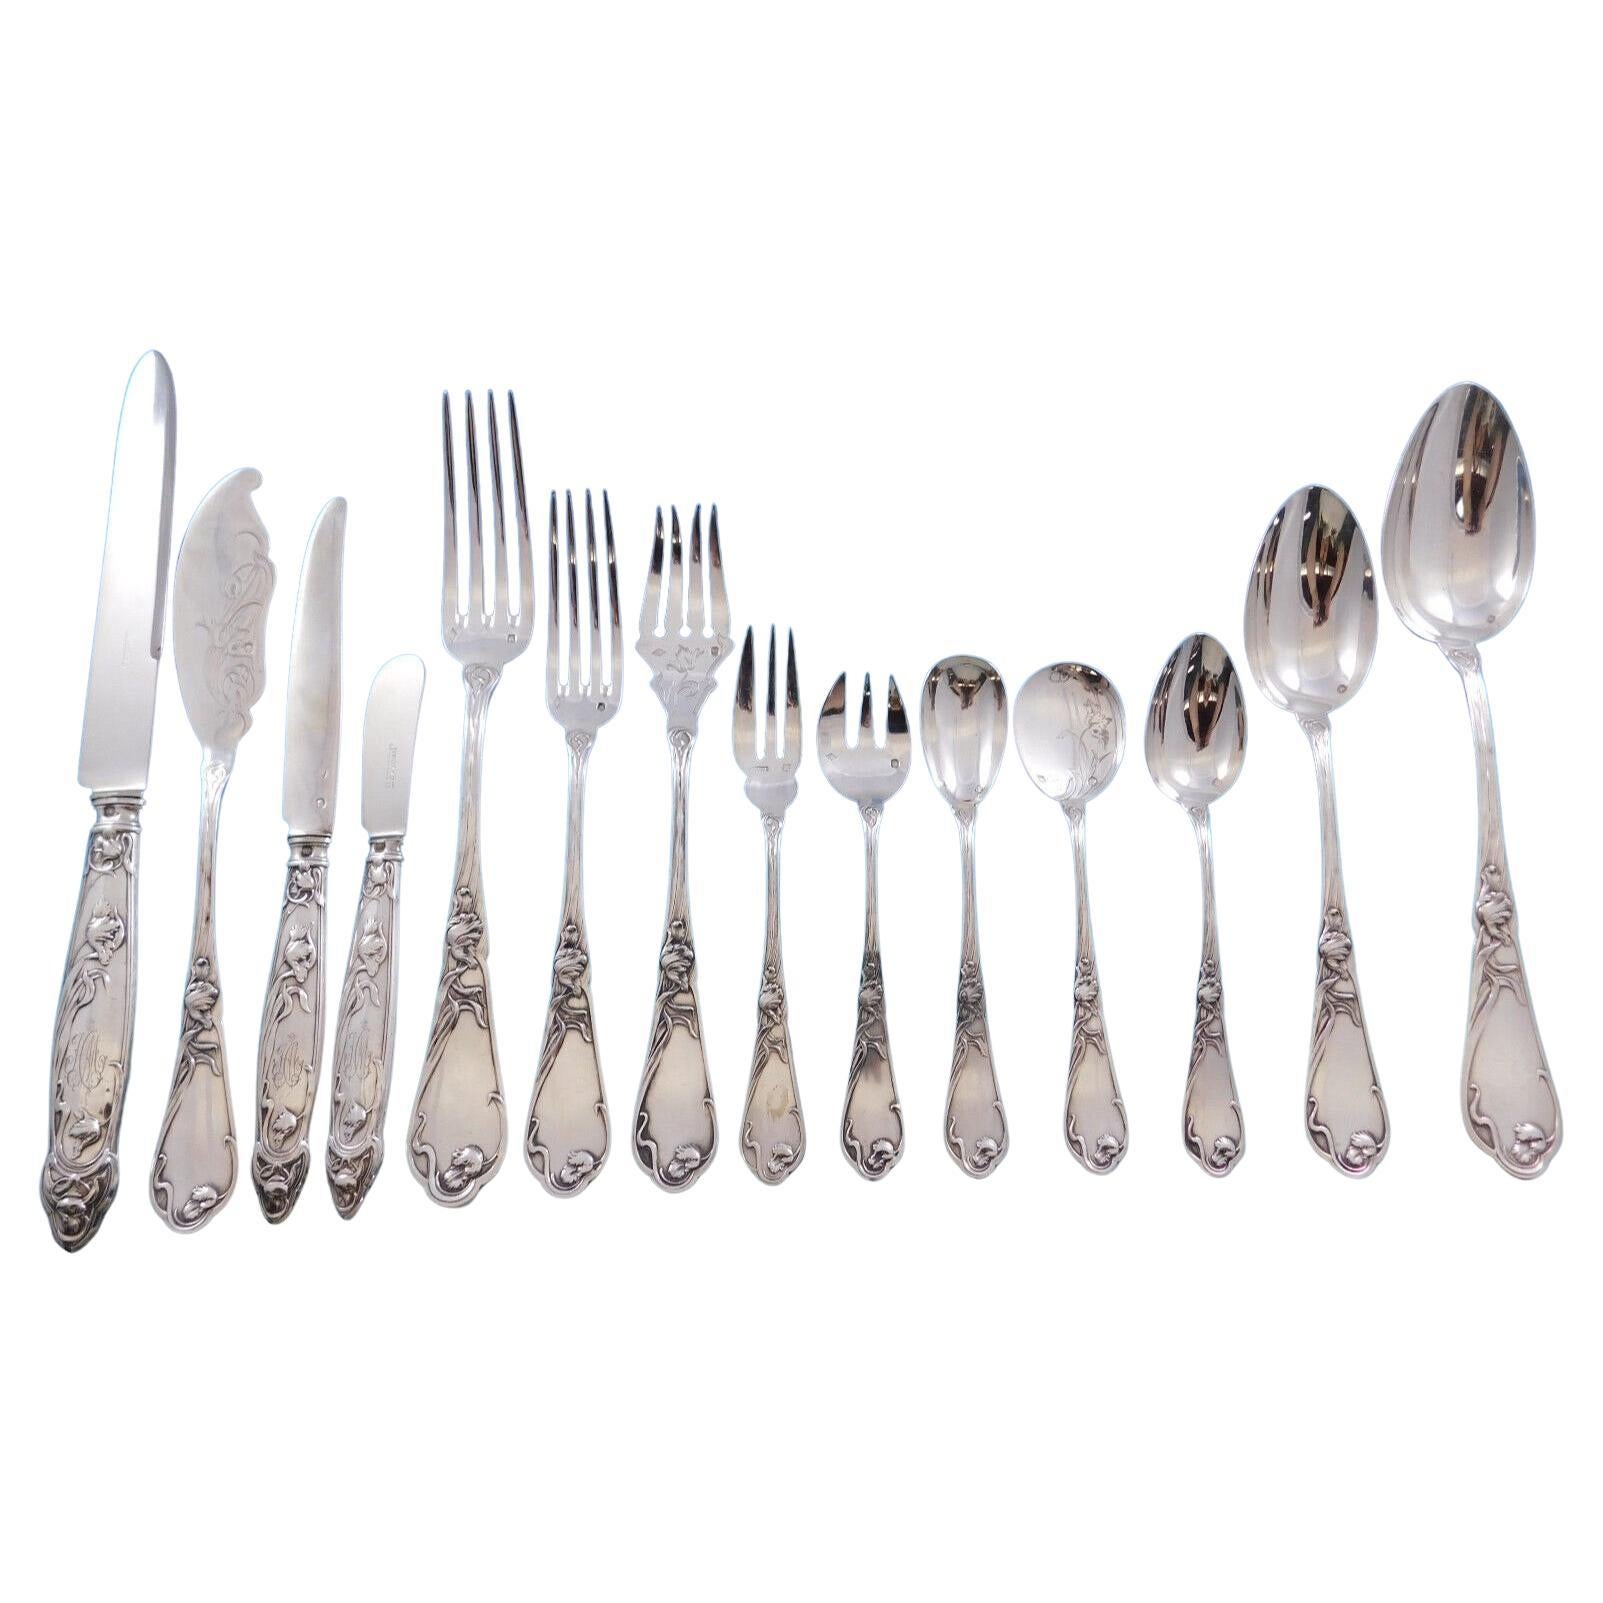 Tulipe Tulip by Boulenger French 950 Sterling Silver Flatware Service Set 214 pc For Sale